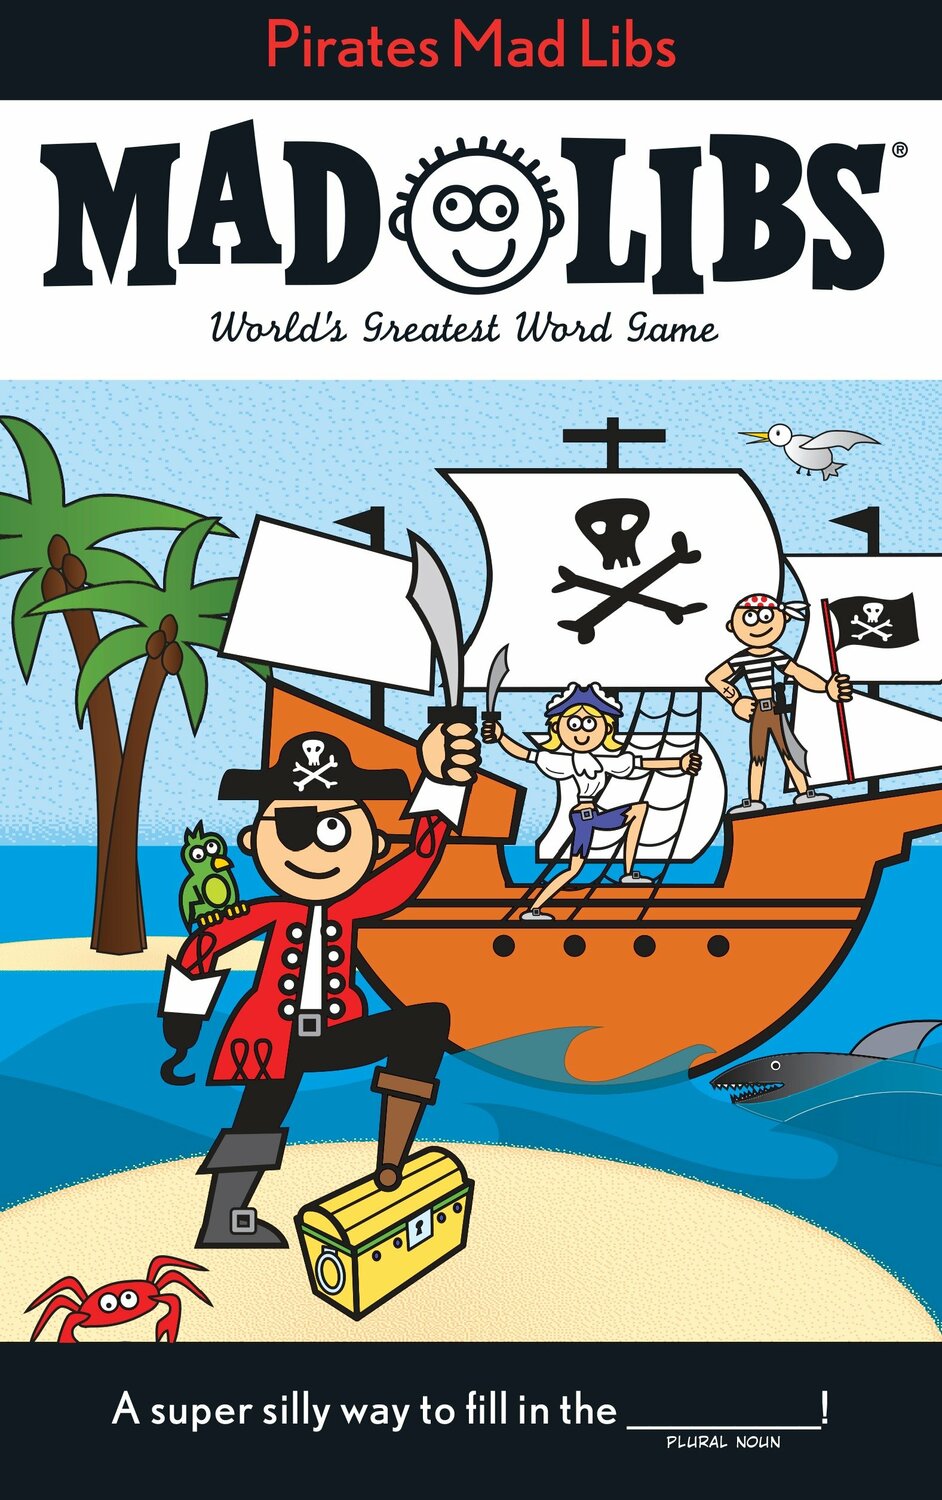 Pirates Mad Libs: World's Greatest Word Game